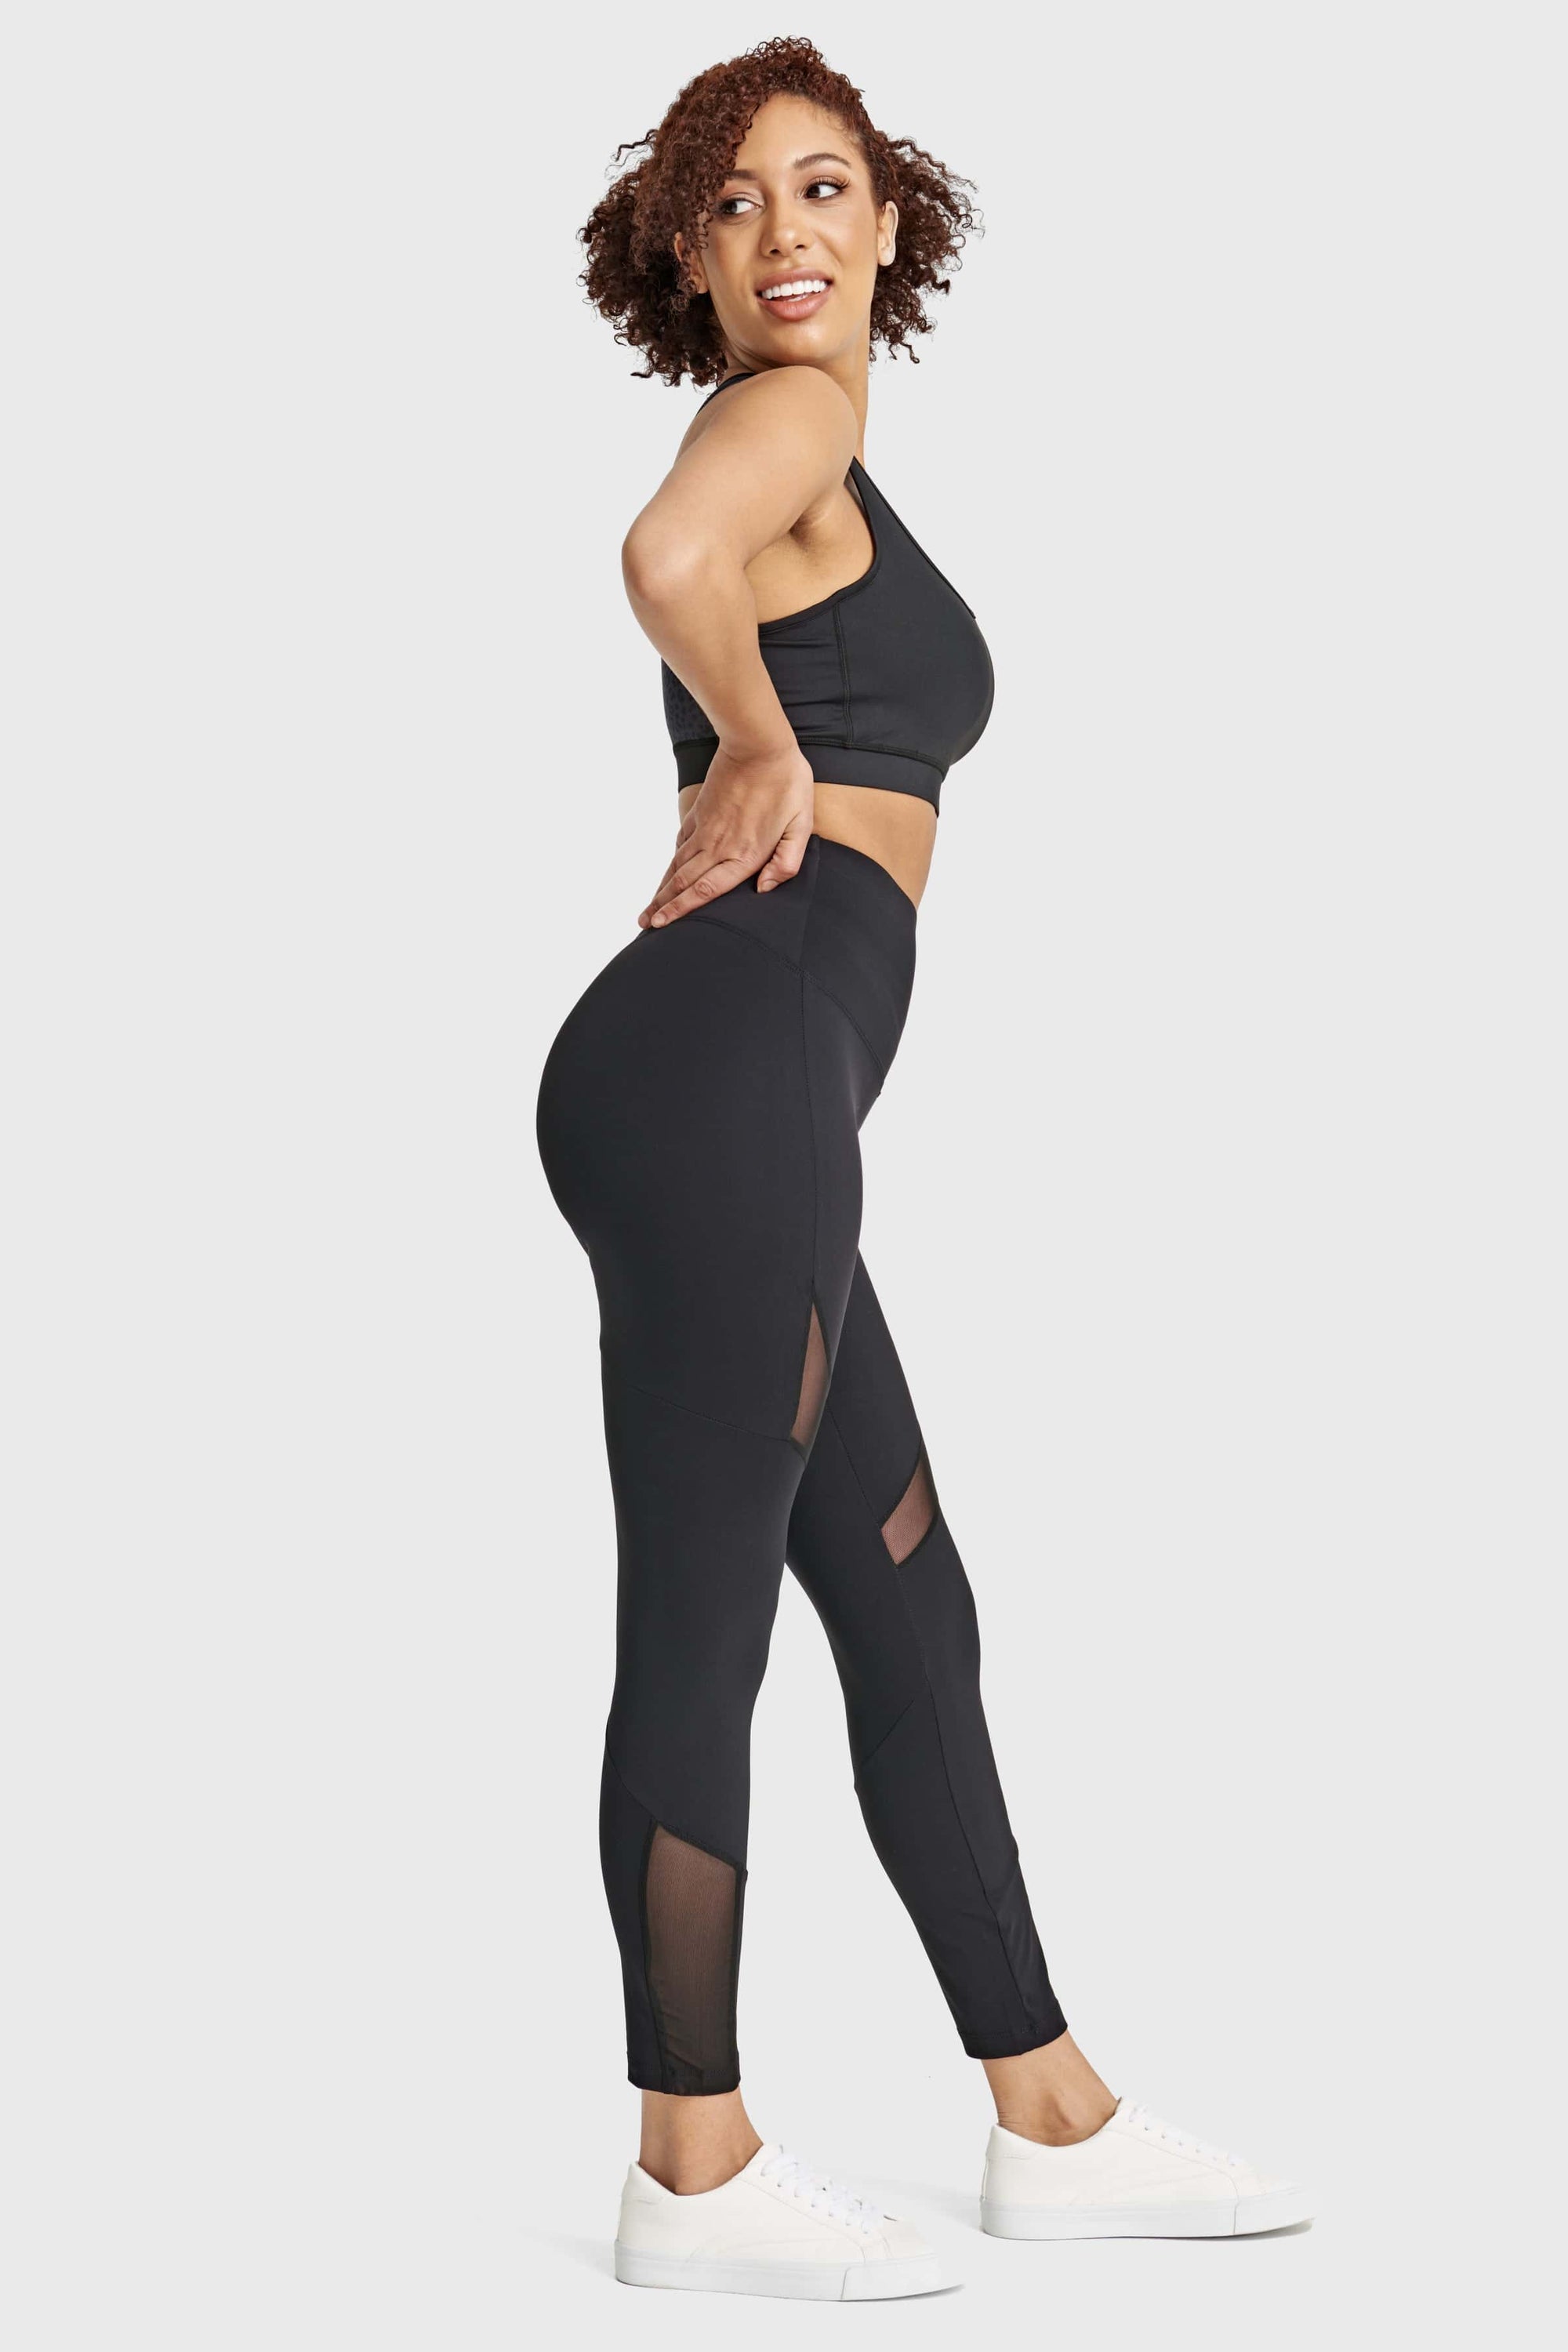 Superfit Diwo Pro With Mesh Detailing - High Waisted - 7/8 Length - Black 6